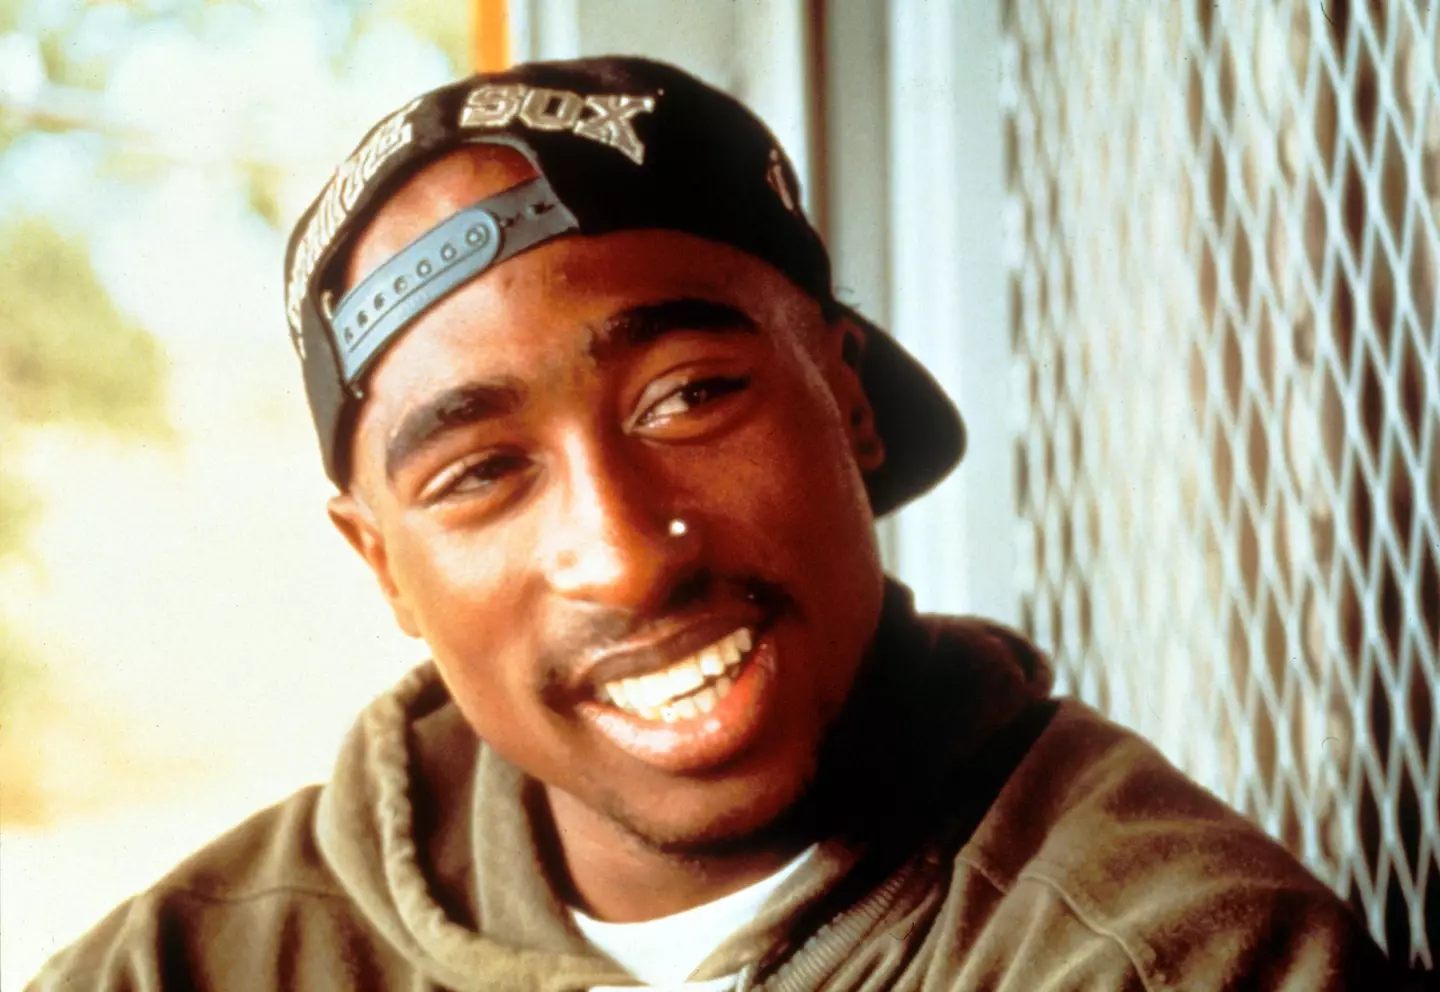 Have you been pronouncing Tupac right?